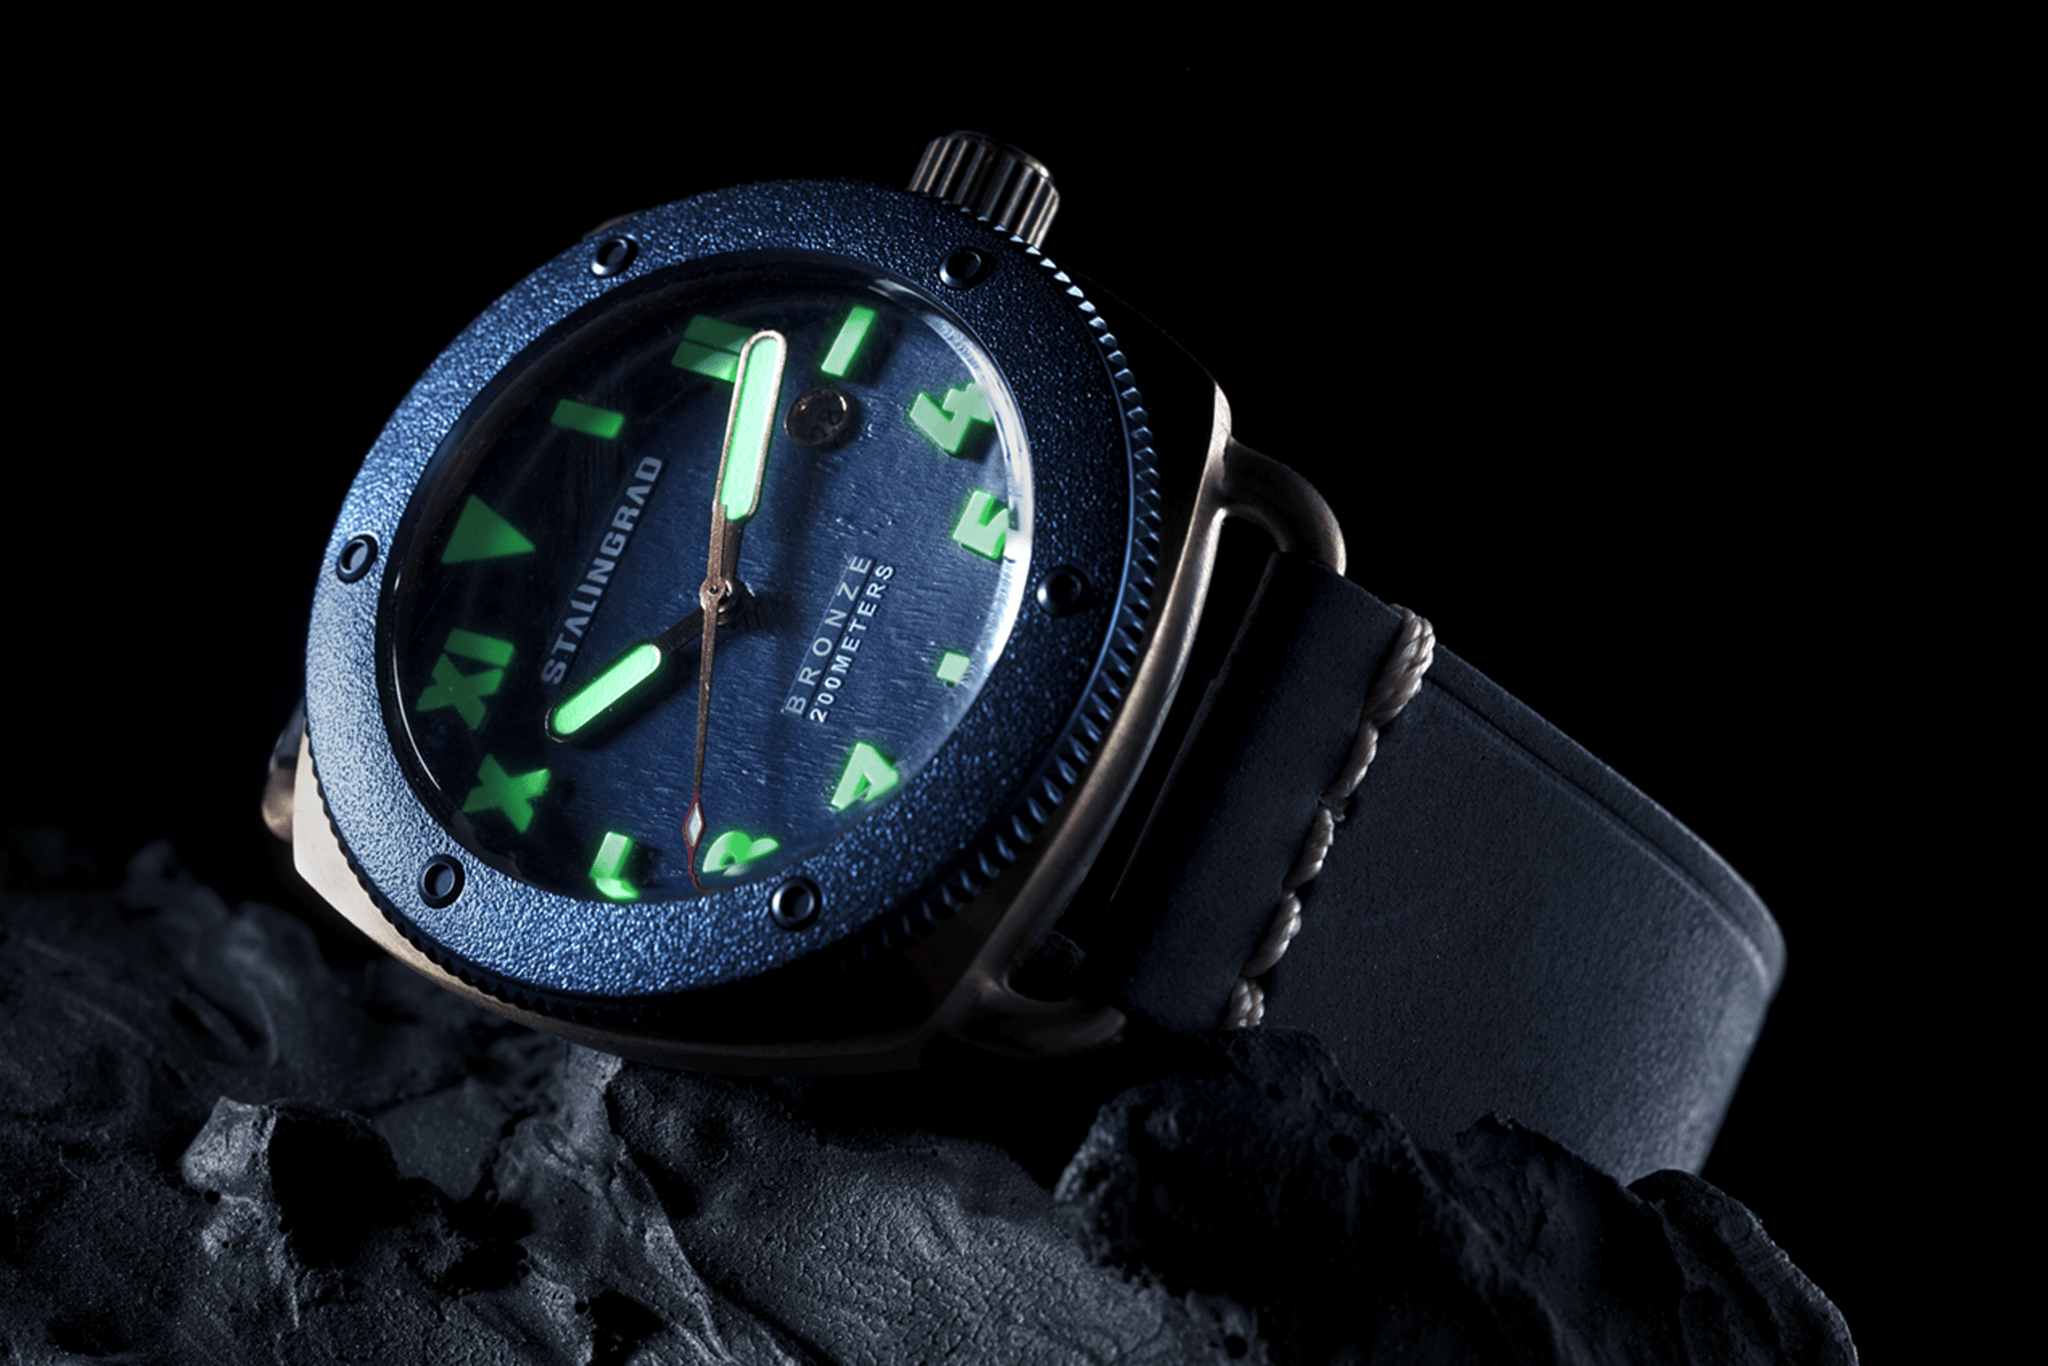 Stalingrad Bronze Men's watch with blue dial on a rock showing hands glowing with lume